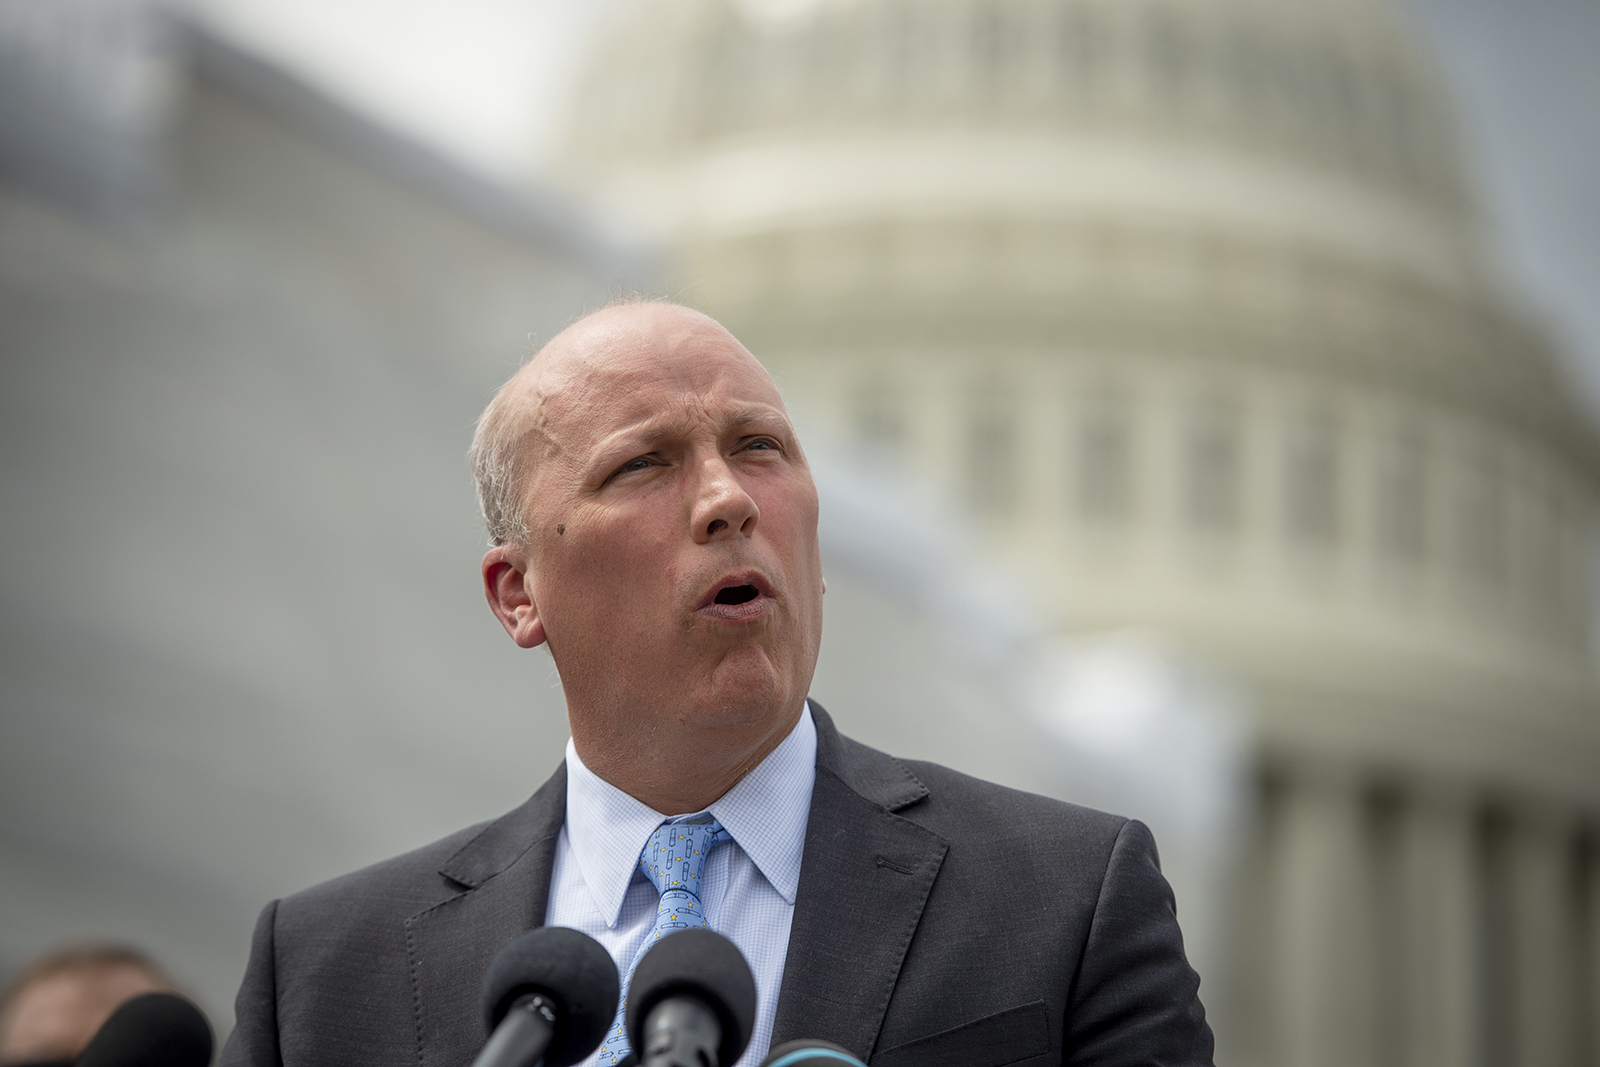 Rep. Chip Roy of Texas speaks during a press conference on the situation at the southern border in Washington on Tuesday, June 18, 2019. 